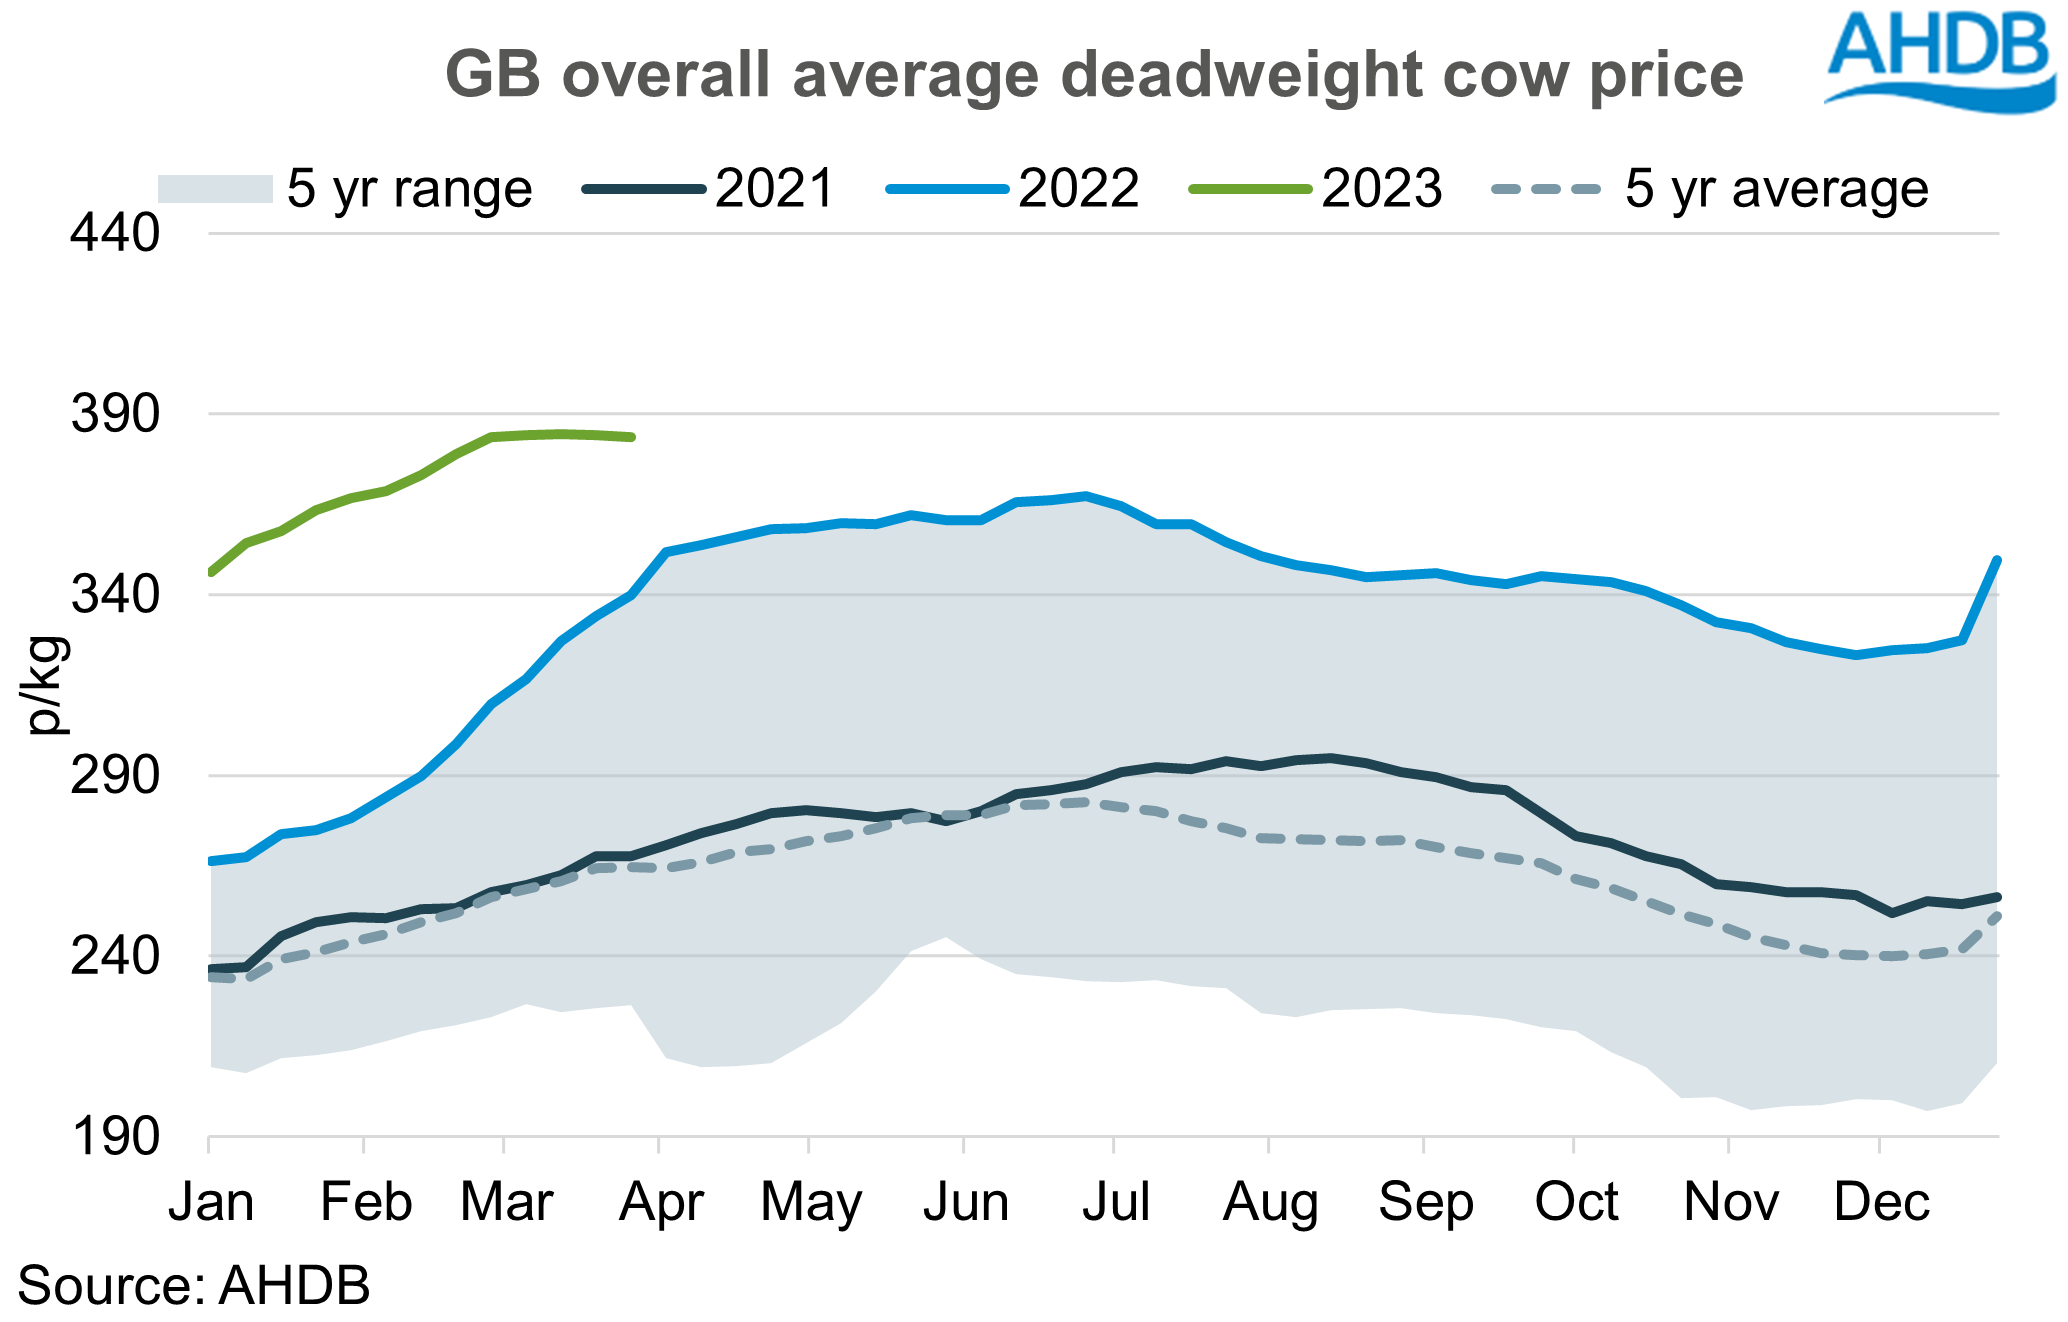 graph showing gb deadweight cow prices